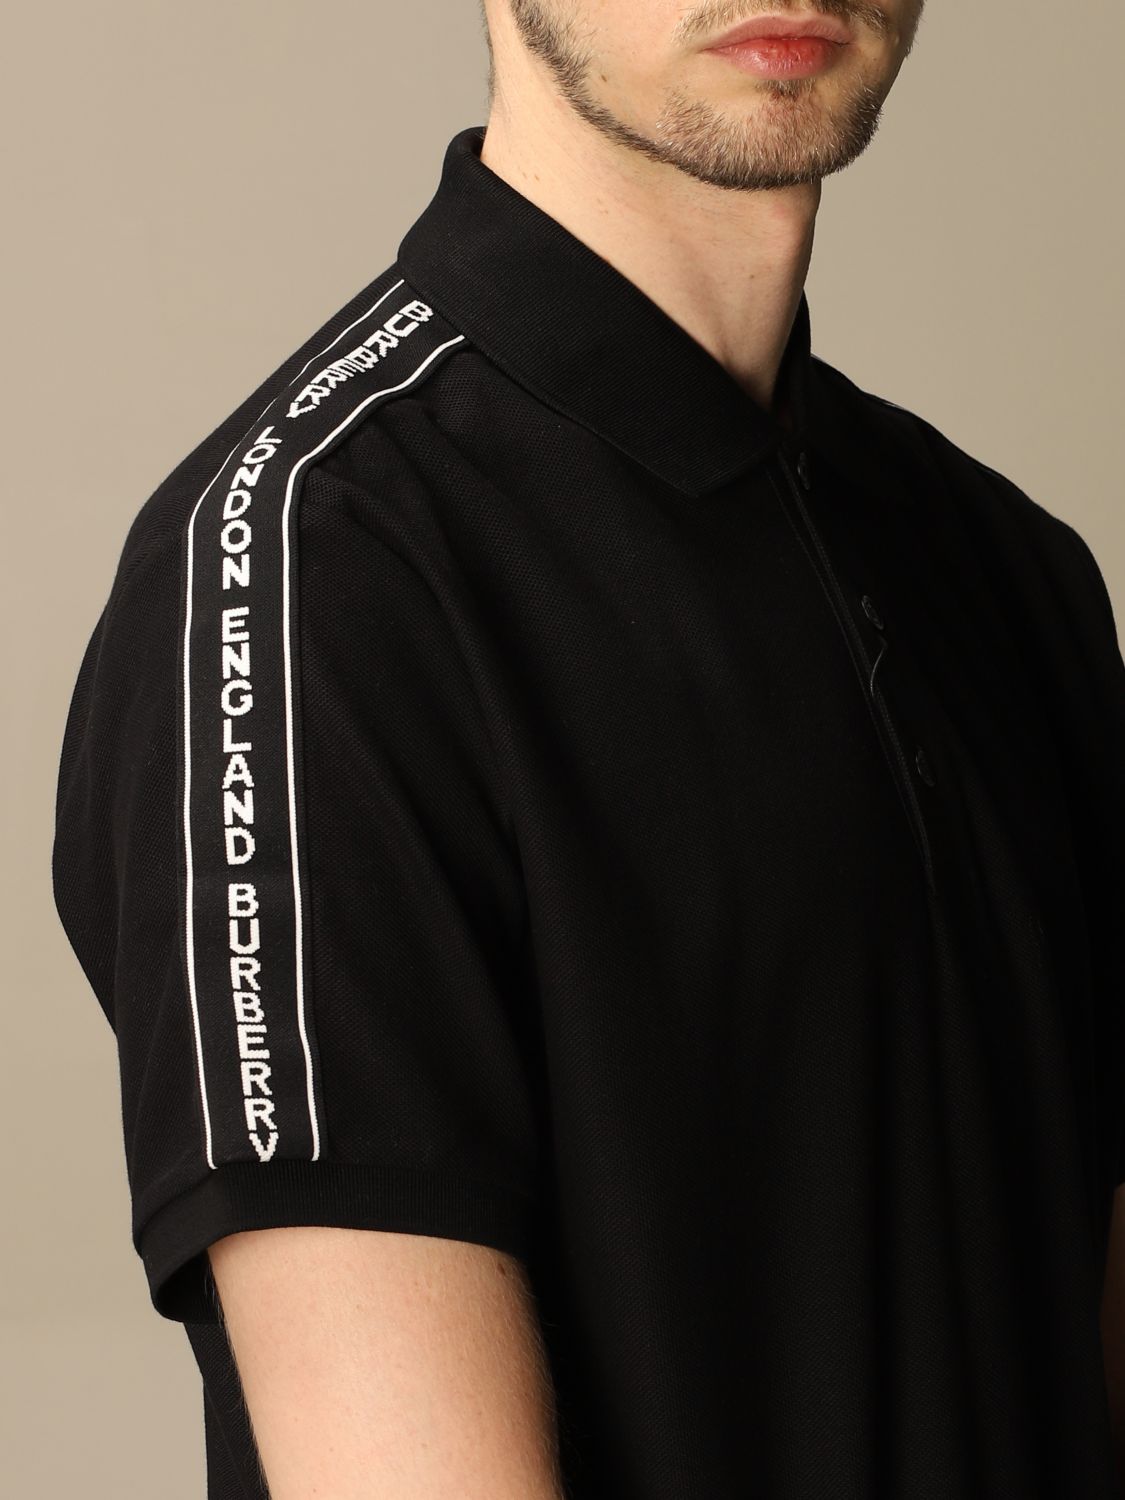 Burberry Outlet: Stonely polo shirt in piqué cotton with logoed bands - Black | Burberry polo